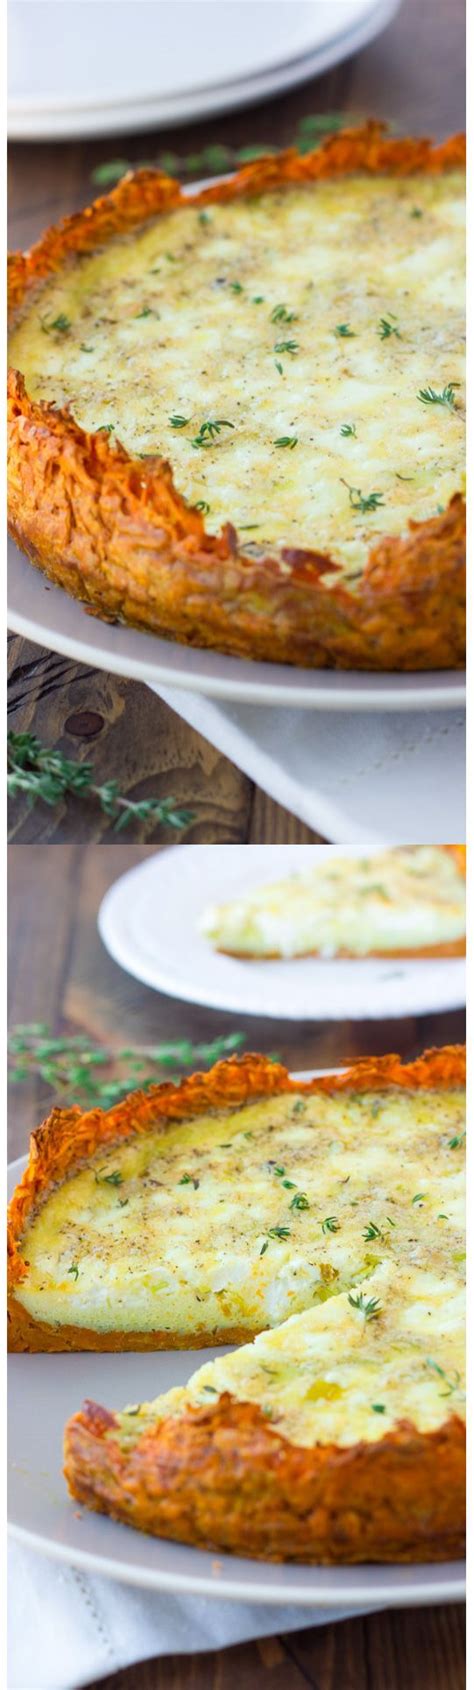 Sweet Potato Crusted Quiche With Goat Cheese And Leeks Gluten Free